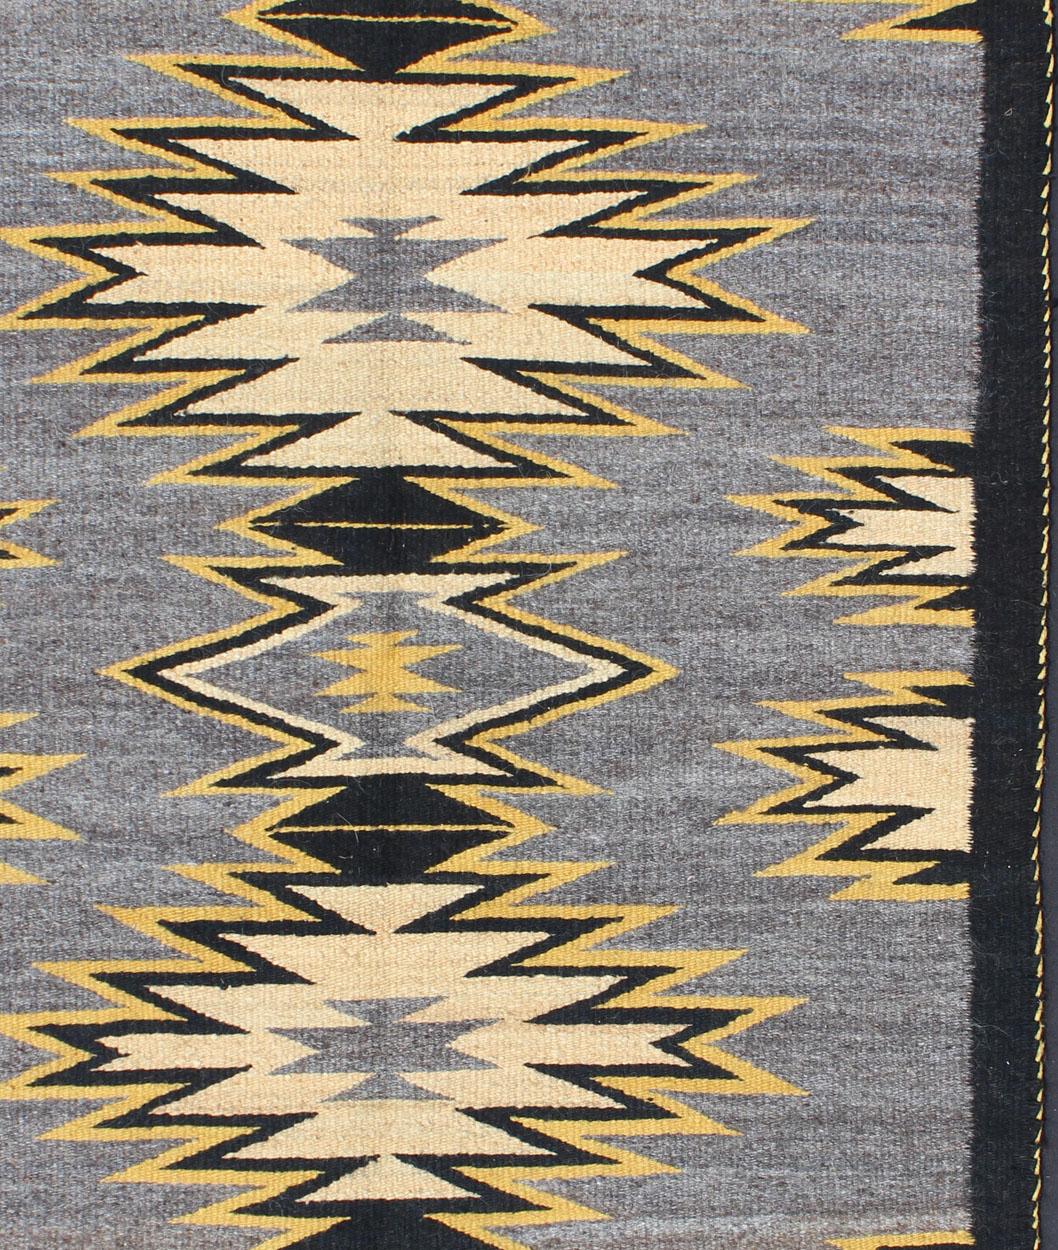 This intriguing antique Navajo Kilim, circa 1940 was woven in the United States during the first half of the 20th century. The exciting and unique composition boasts a captivating geometric composition with an all-over medallion design. The range of